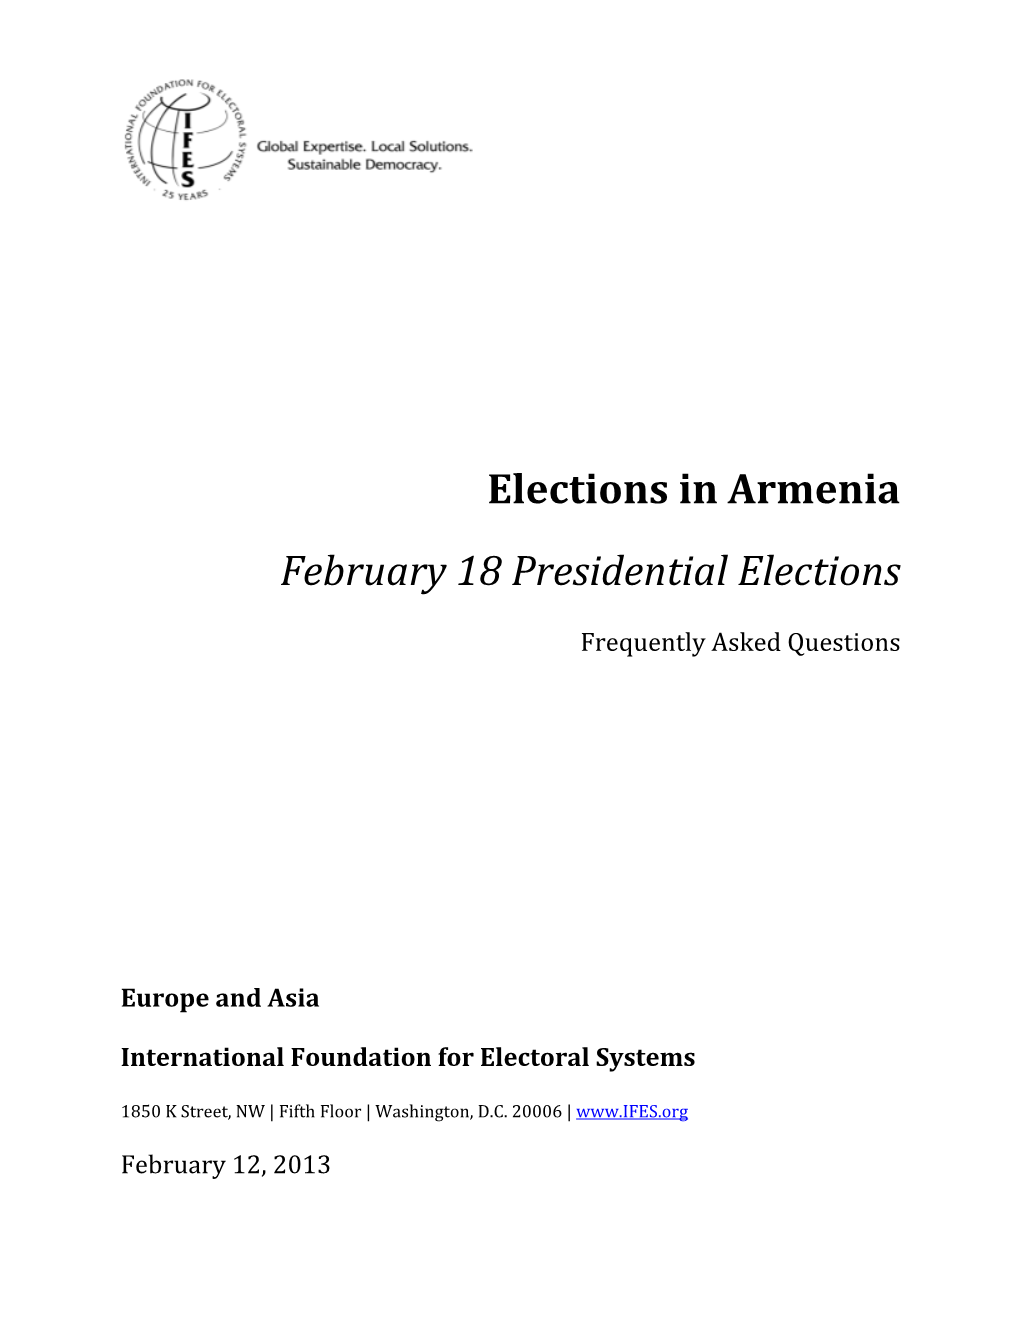 Elections in Armenia February 18 Presidential Elections